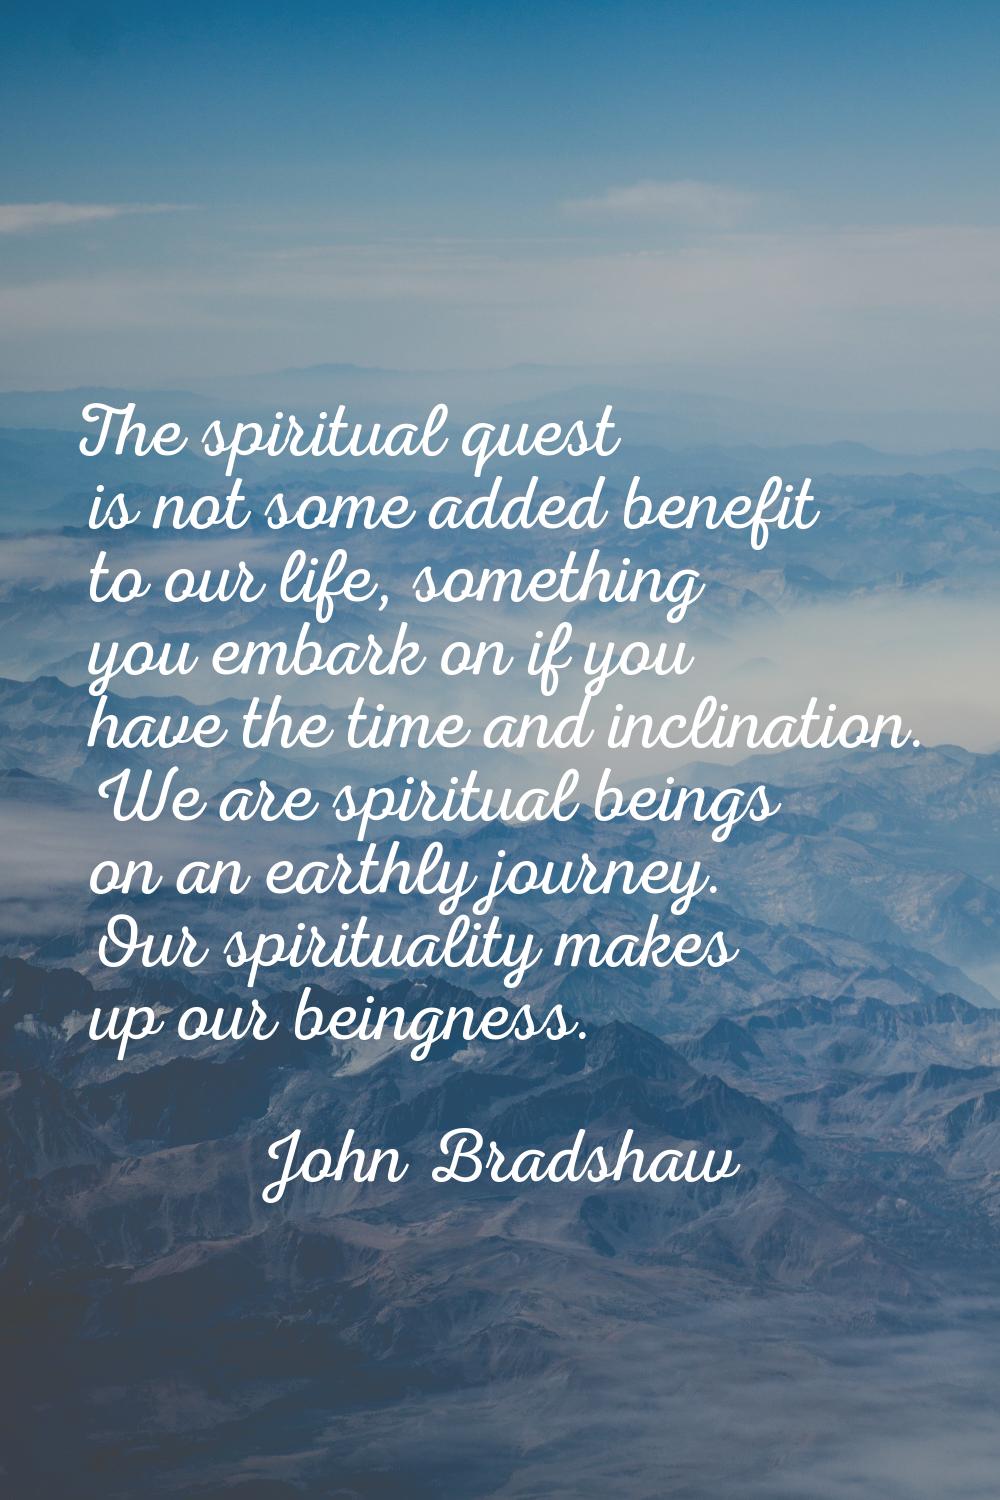 The spiritual quest is not some added benefit to our life, something you embark on if you have the 